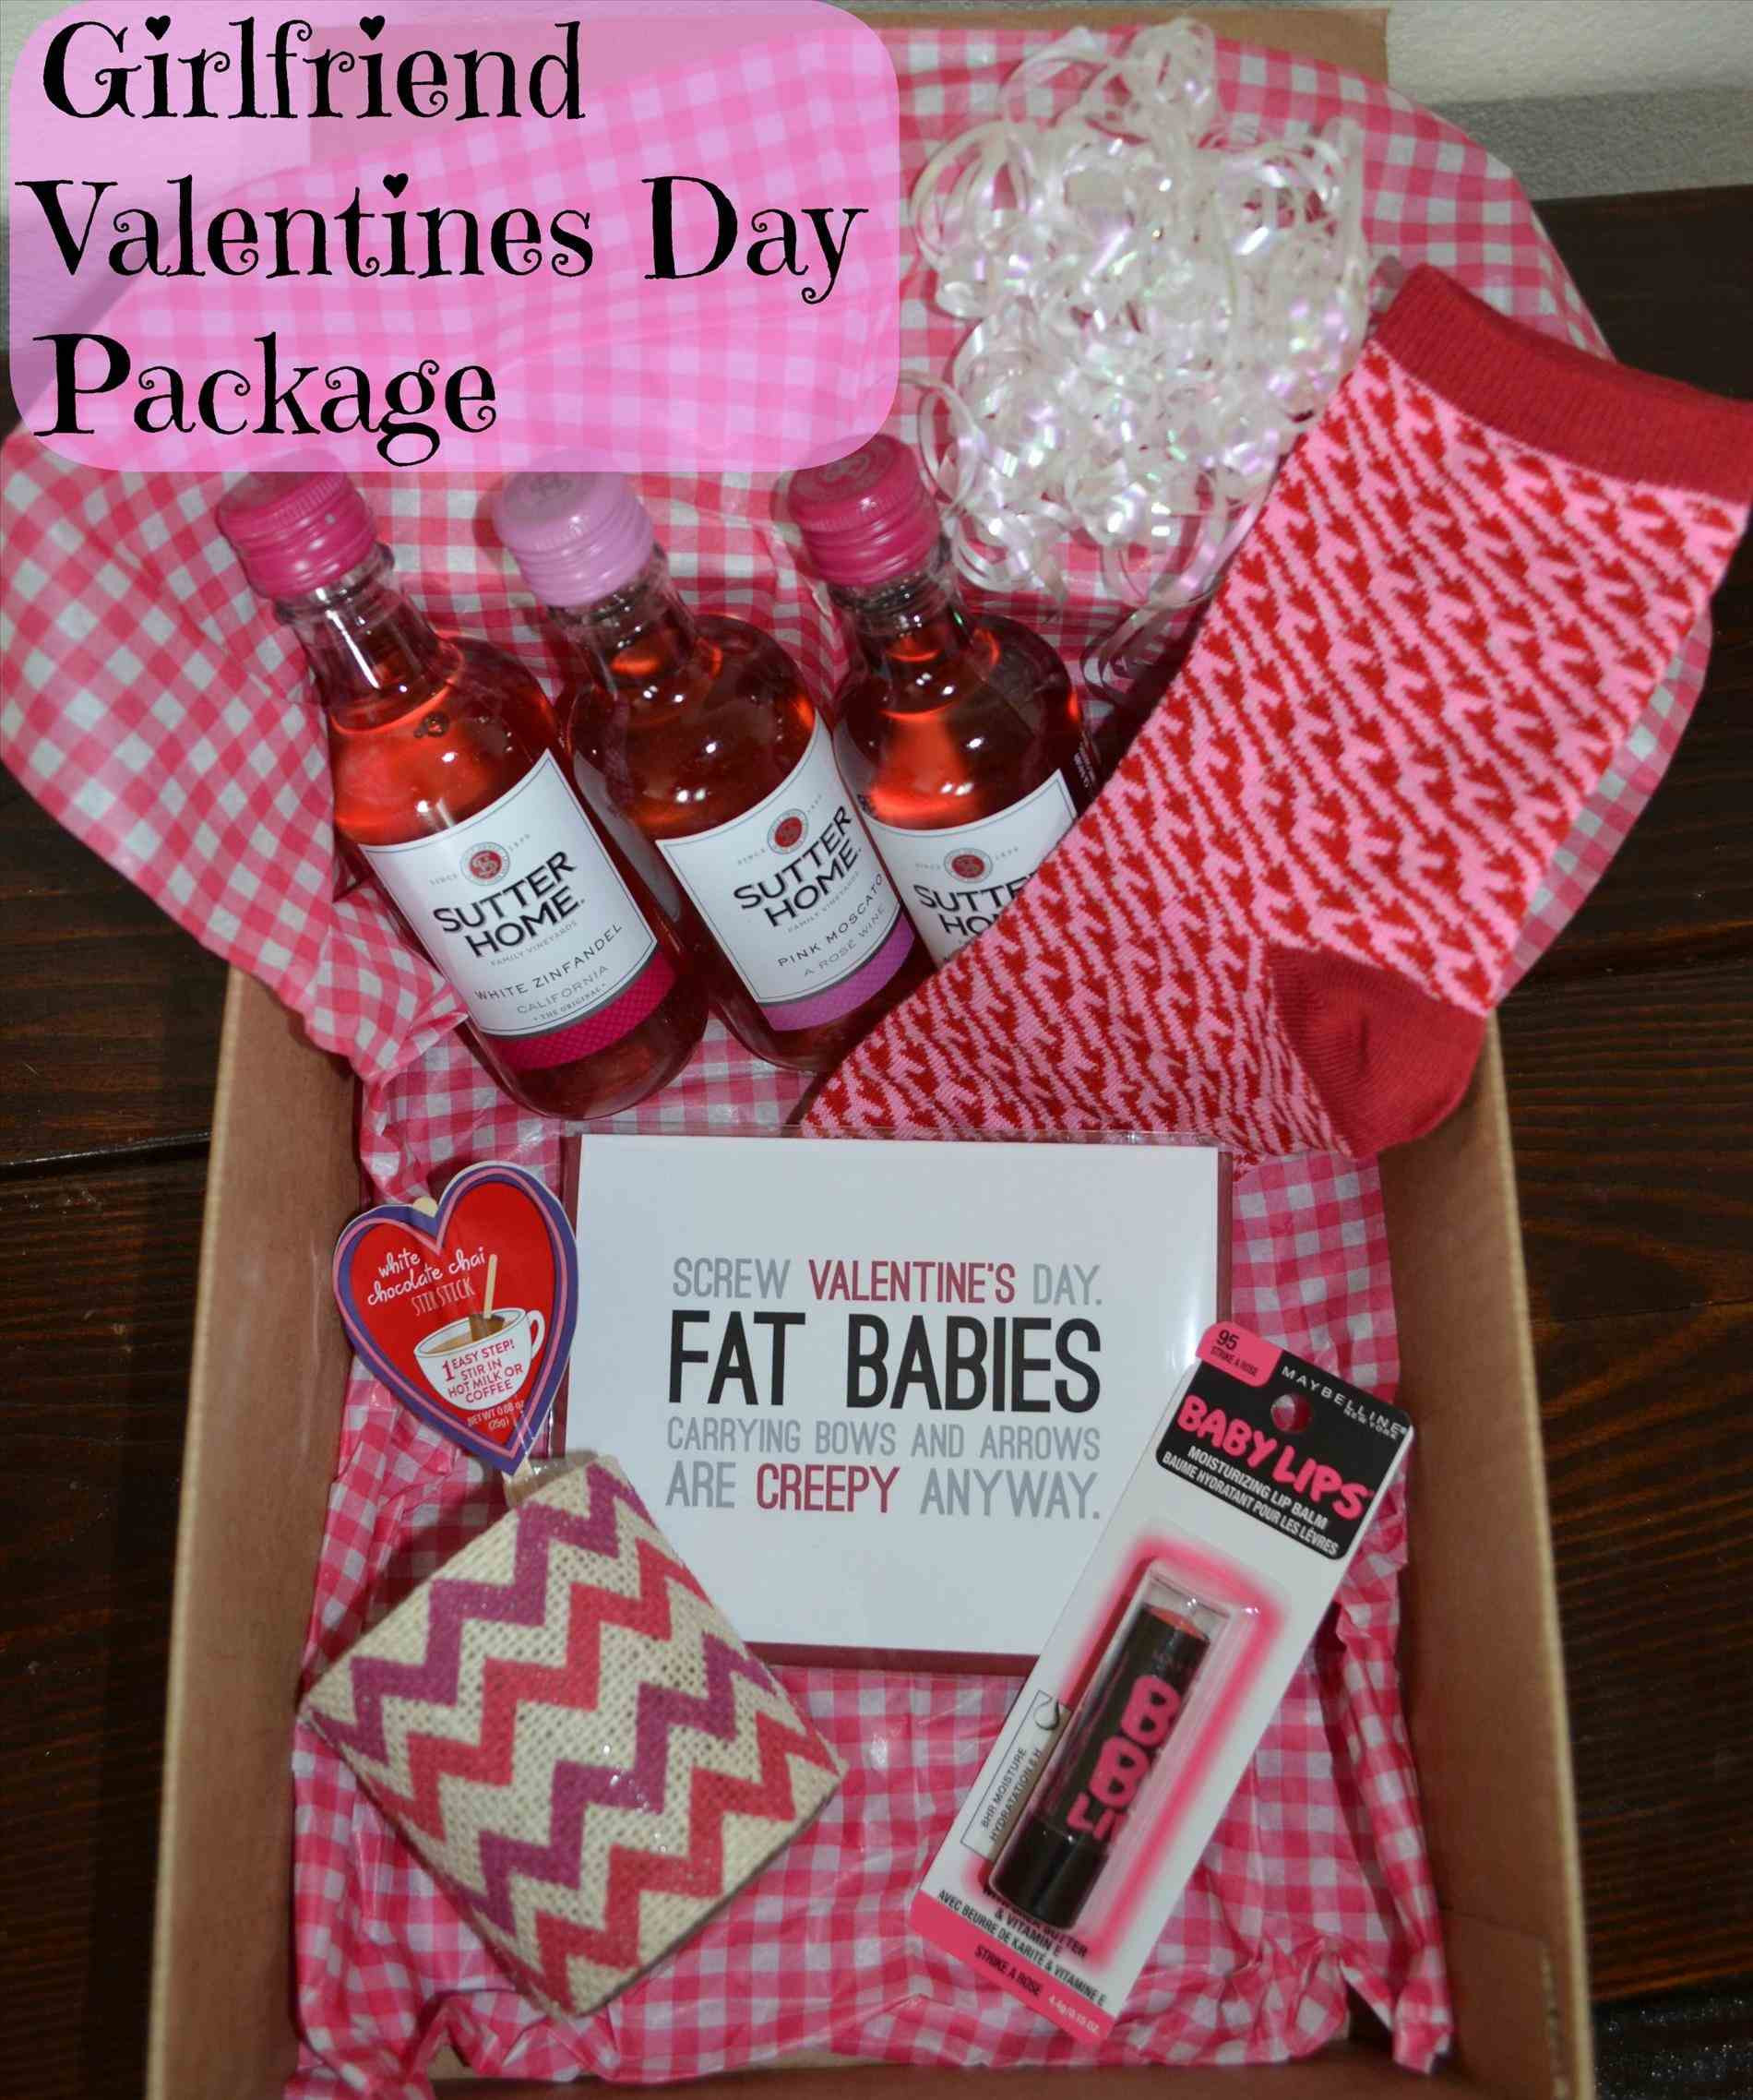 Great Valentines Day Gifts For Boyfriend
 More About Cute Things To Give Your Boyfriend For